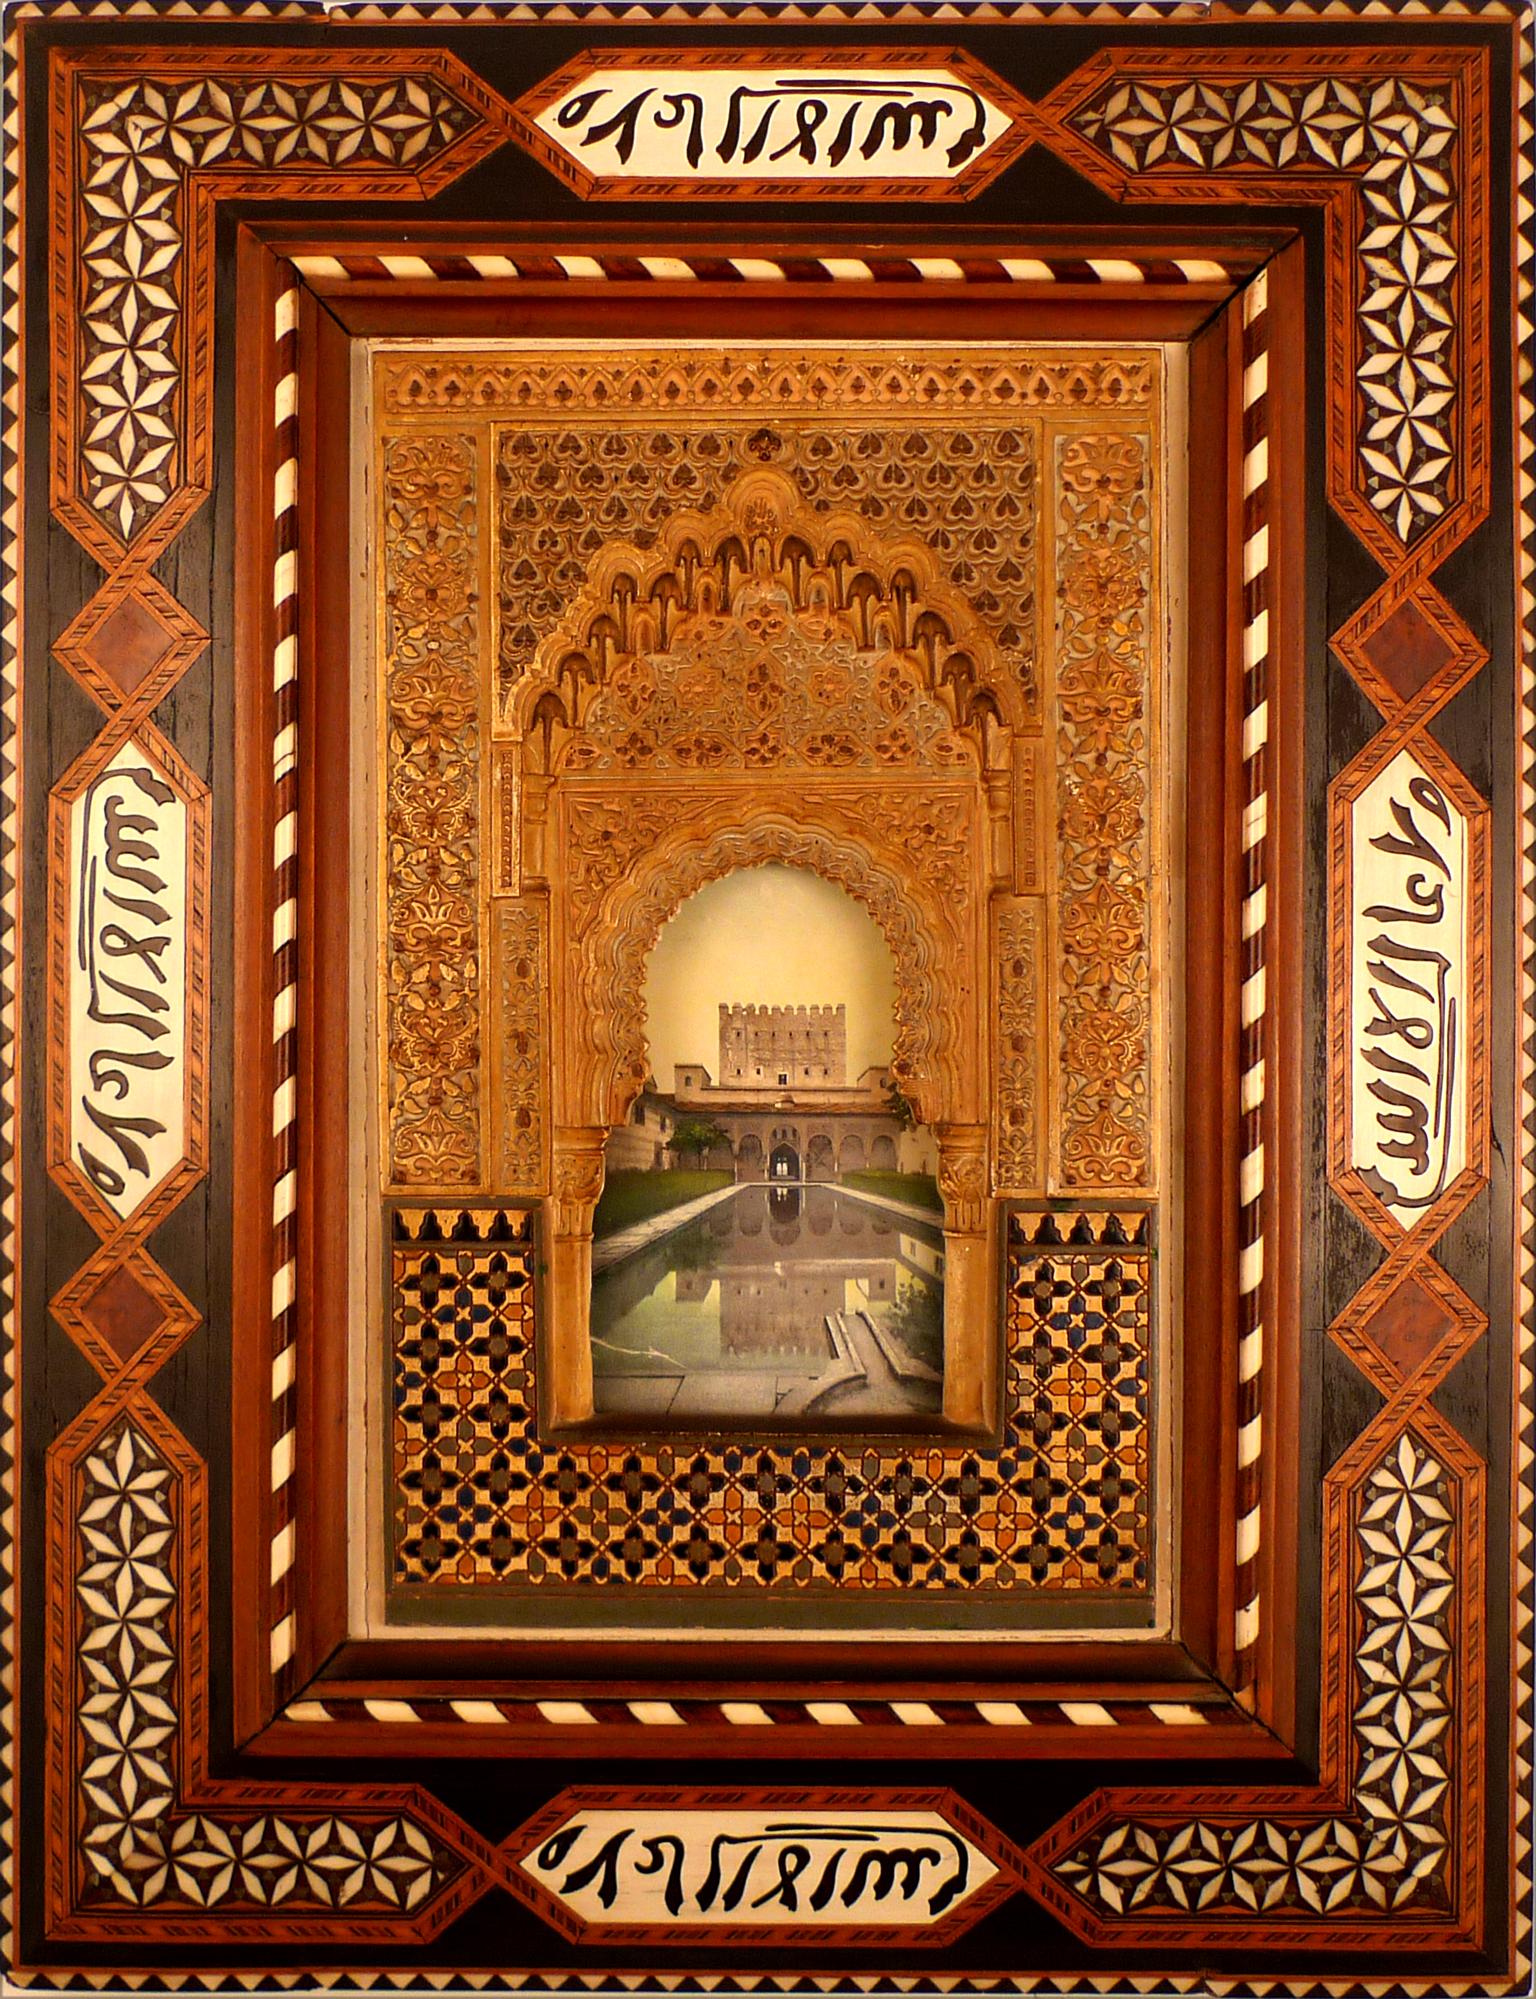 "Alhambra Facade Model Plaque", Early 20th Century Polychromed Stucco Plaque